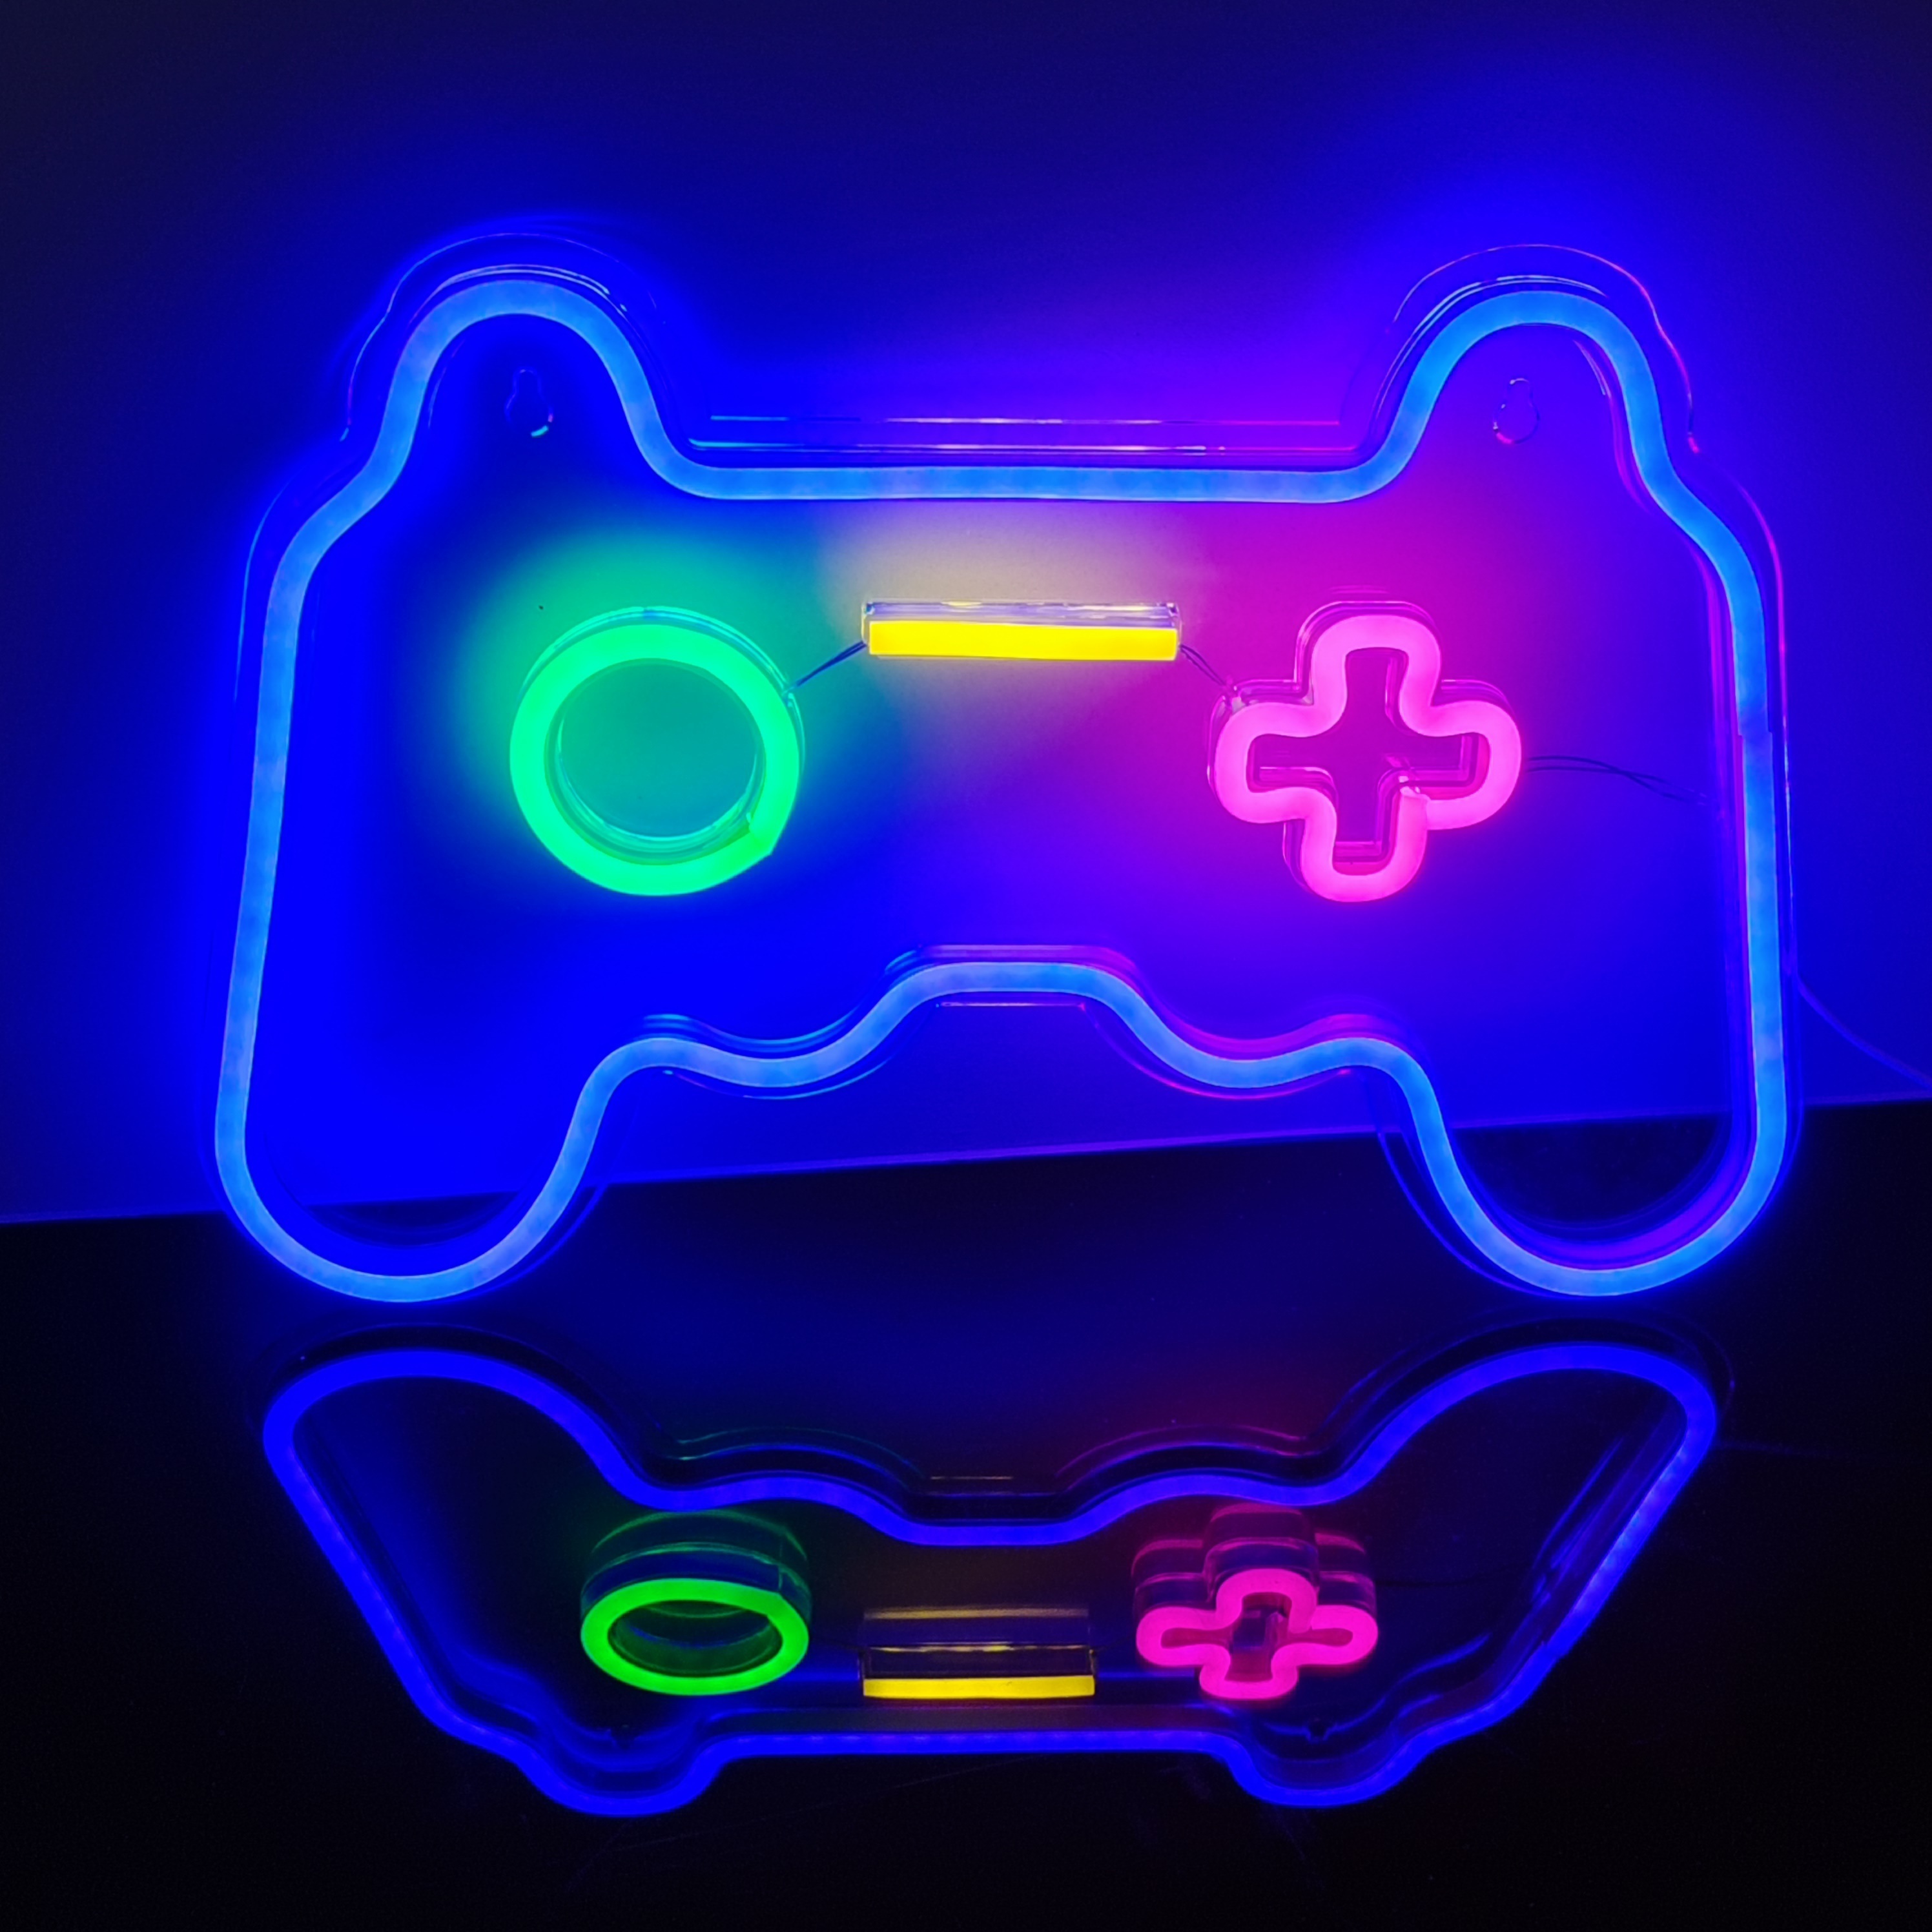  AurGun Game Control Neon Signs, 16x 11 Large Gamepad Shaped  LED Neon Sign for Bedroom Wall Decor Gaming Lights Gamer Birthday Festival  Gifts for Teen Boy Kids Game Room Decoration 